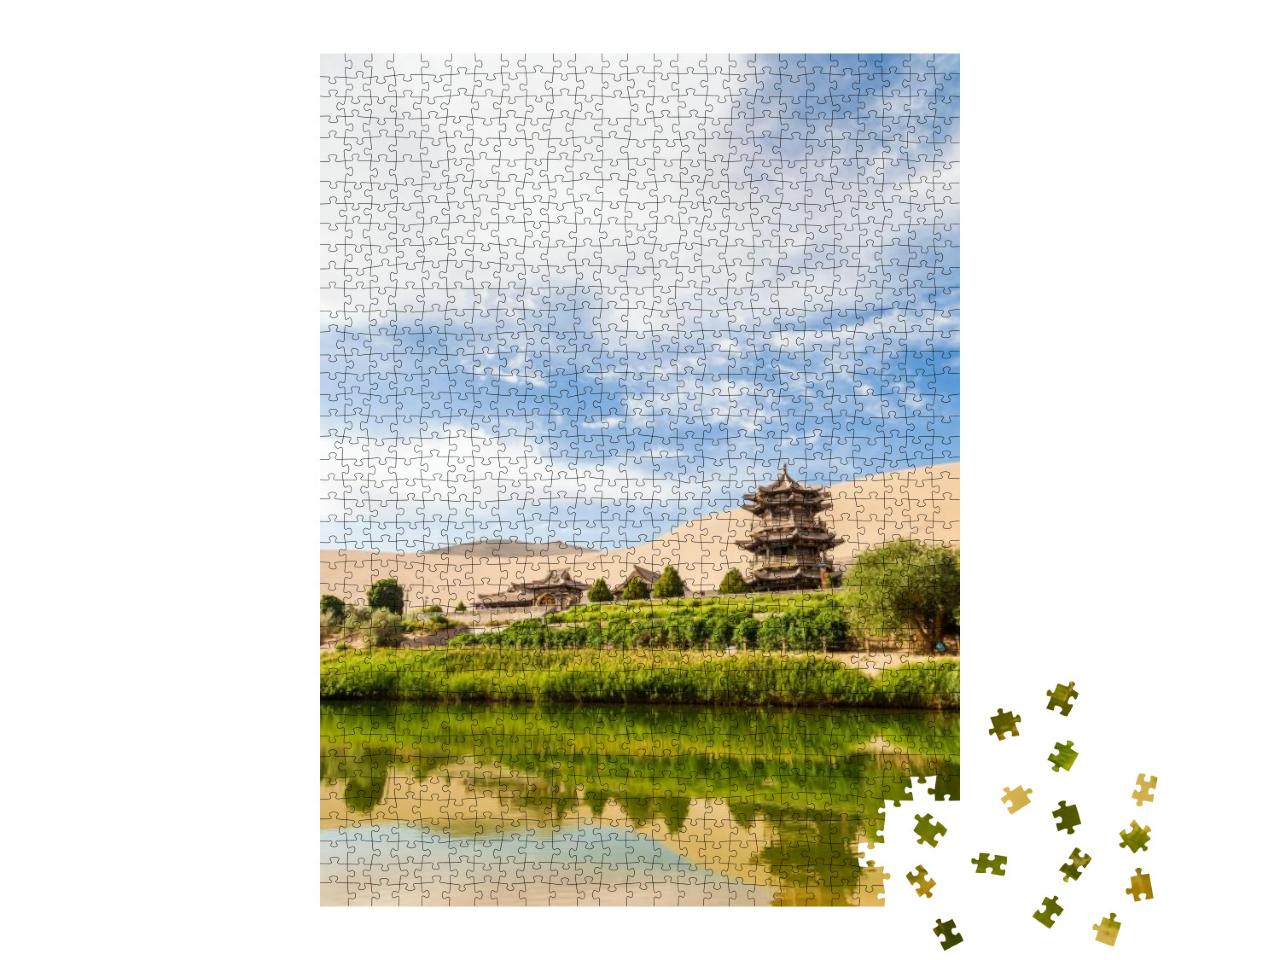 Gansu Dunhuang Crescent Lake & Mingsha Mountain., China... Jigsaw Puzzle with 1000 pieces